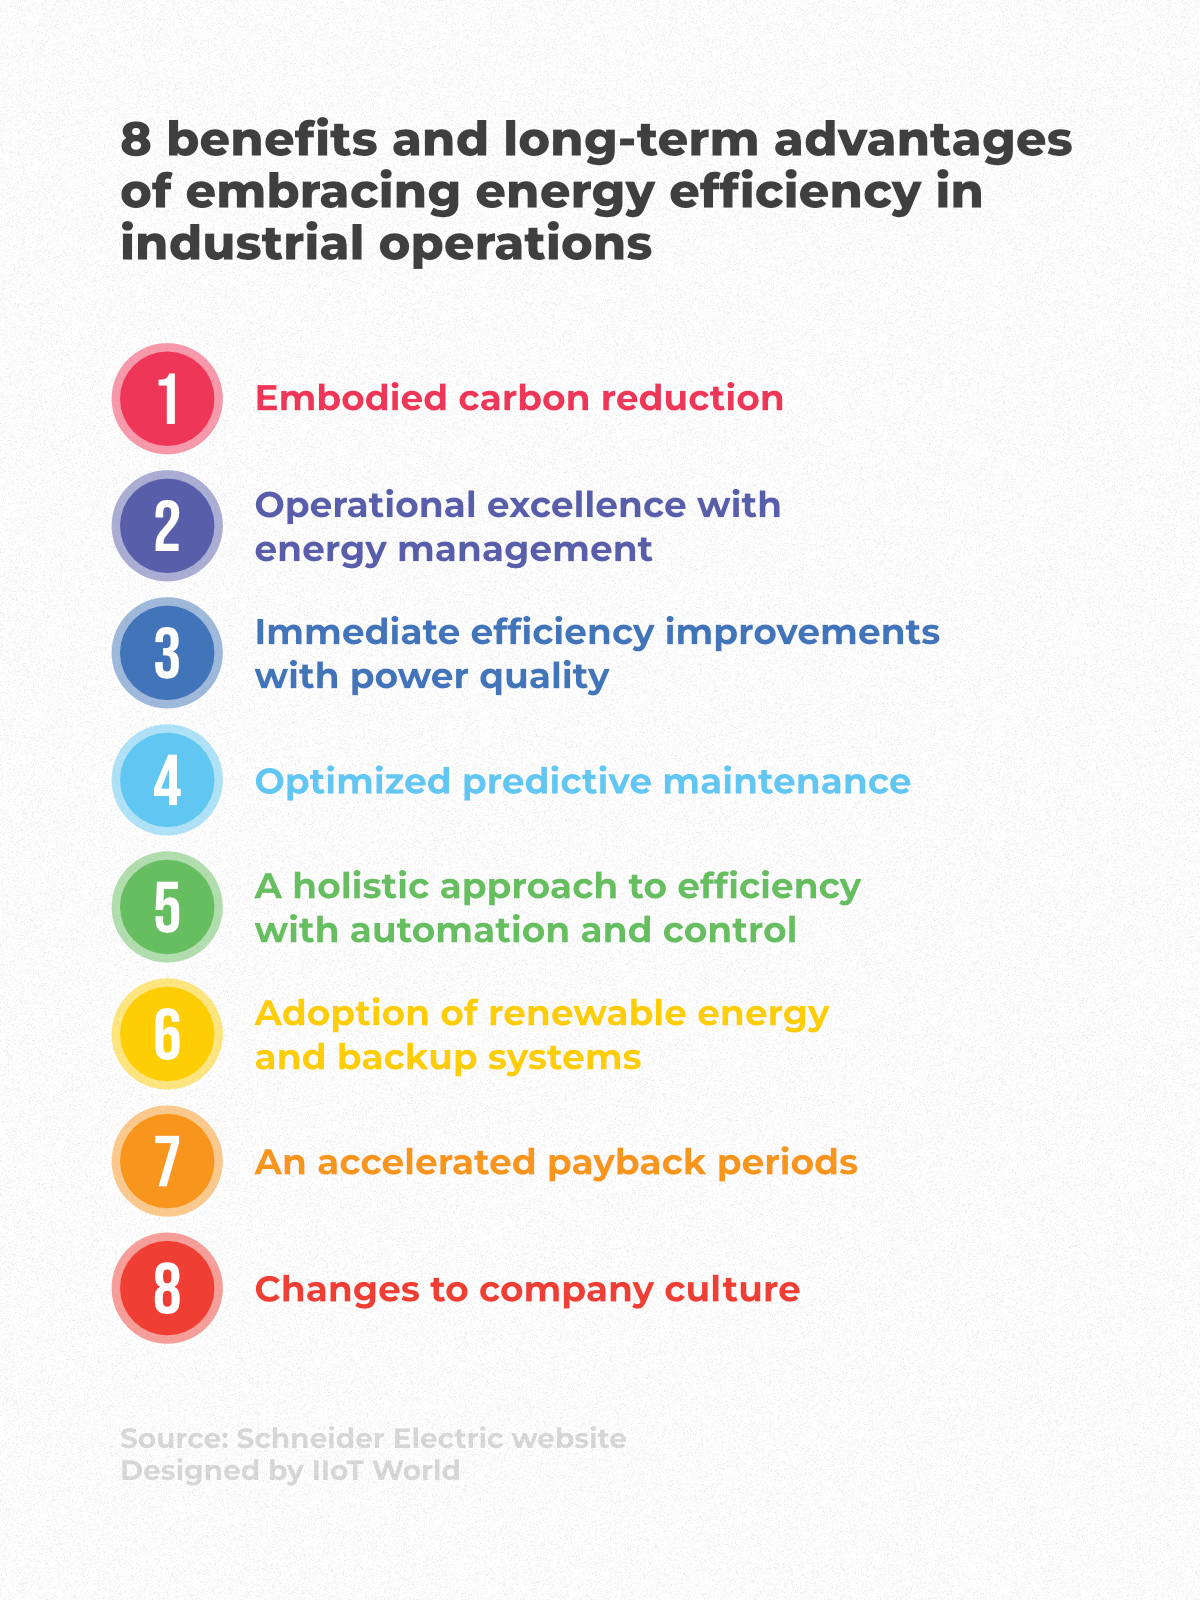 8 benefits and long-term advantages of embracing energy efficiency in industrial operations